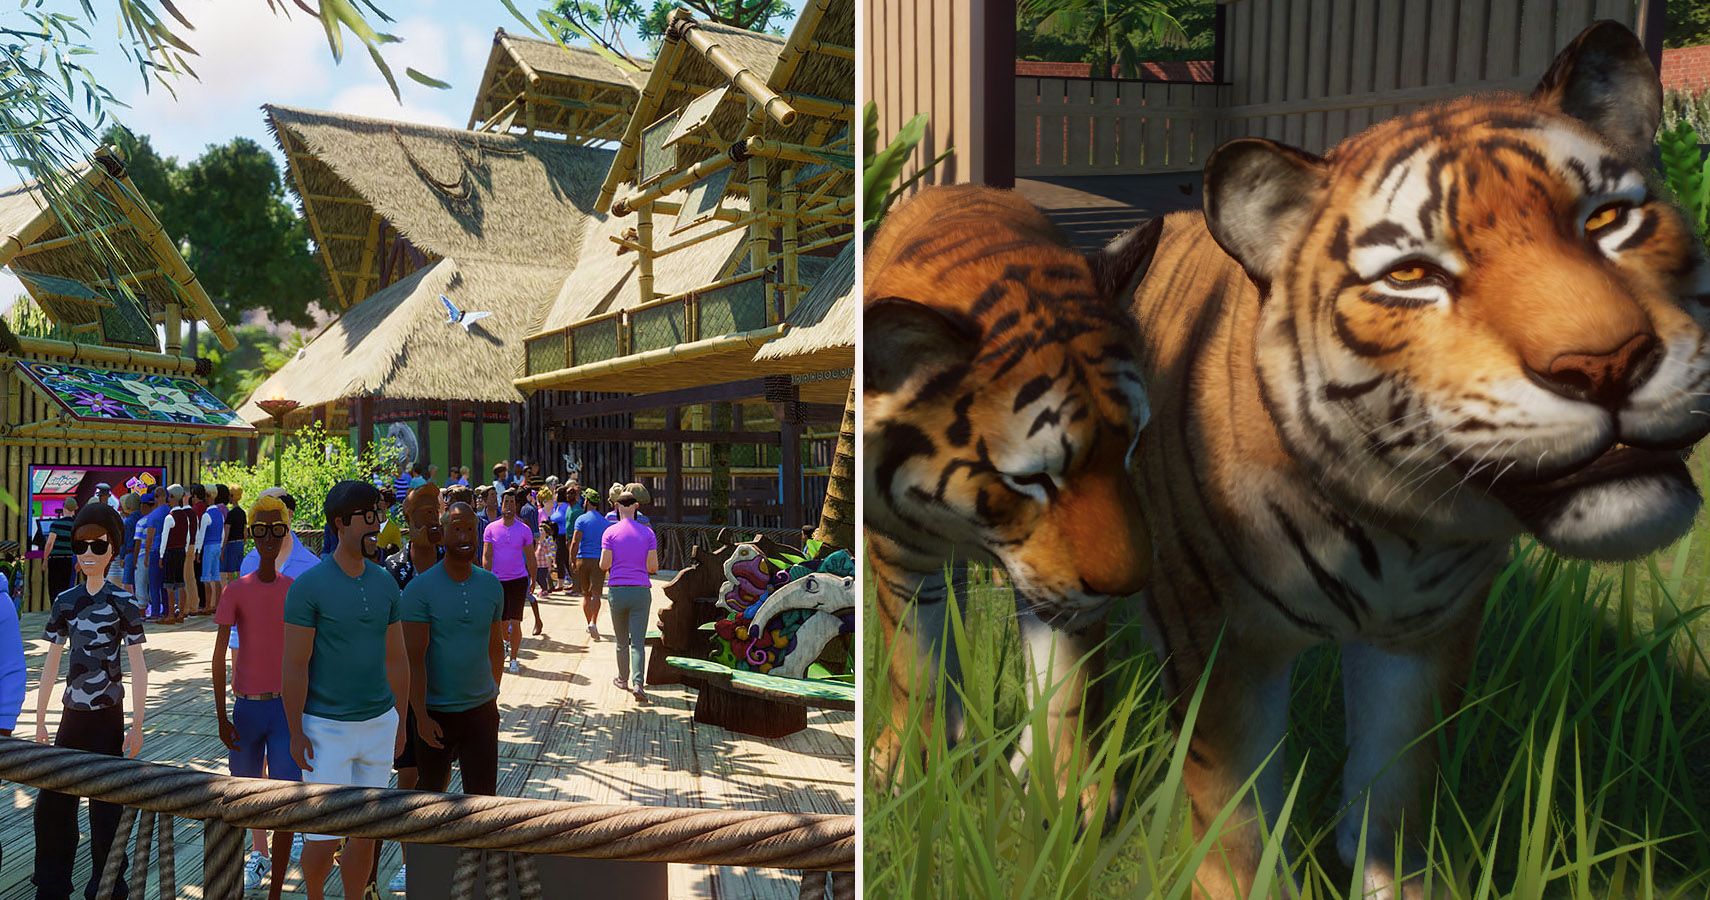 Planet Zoo at the best price